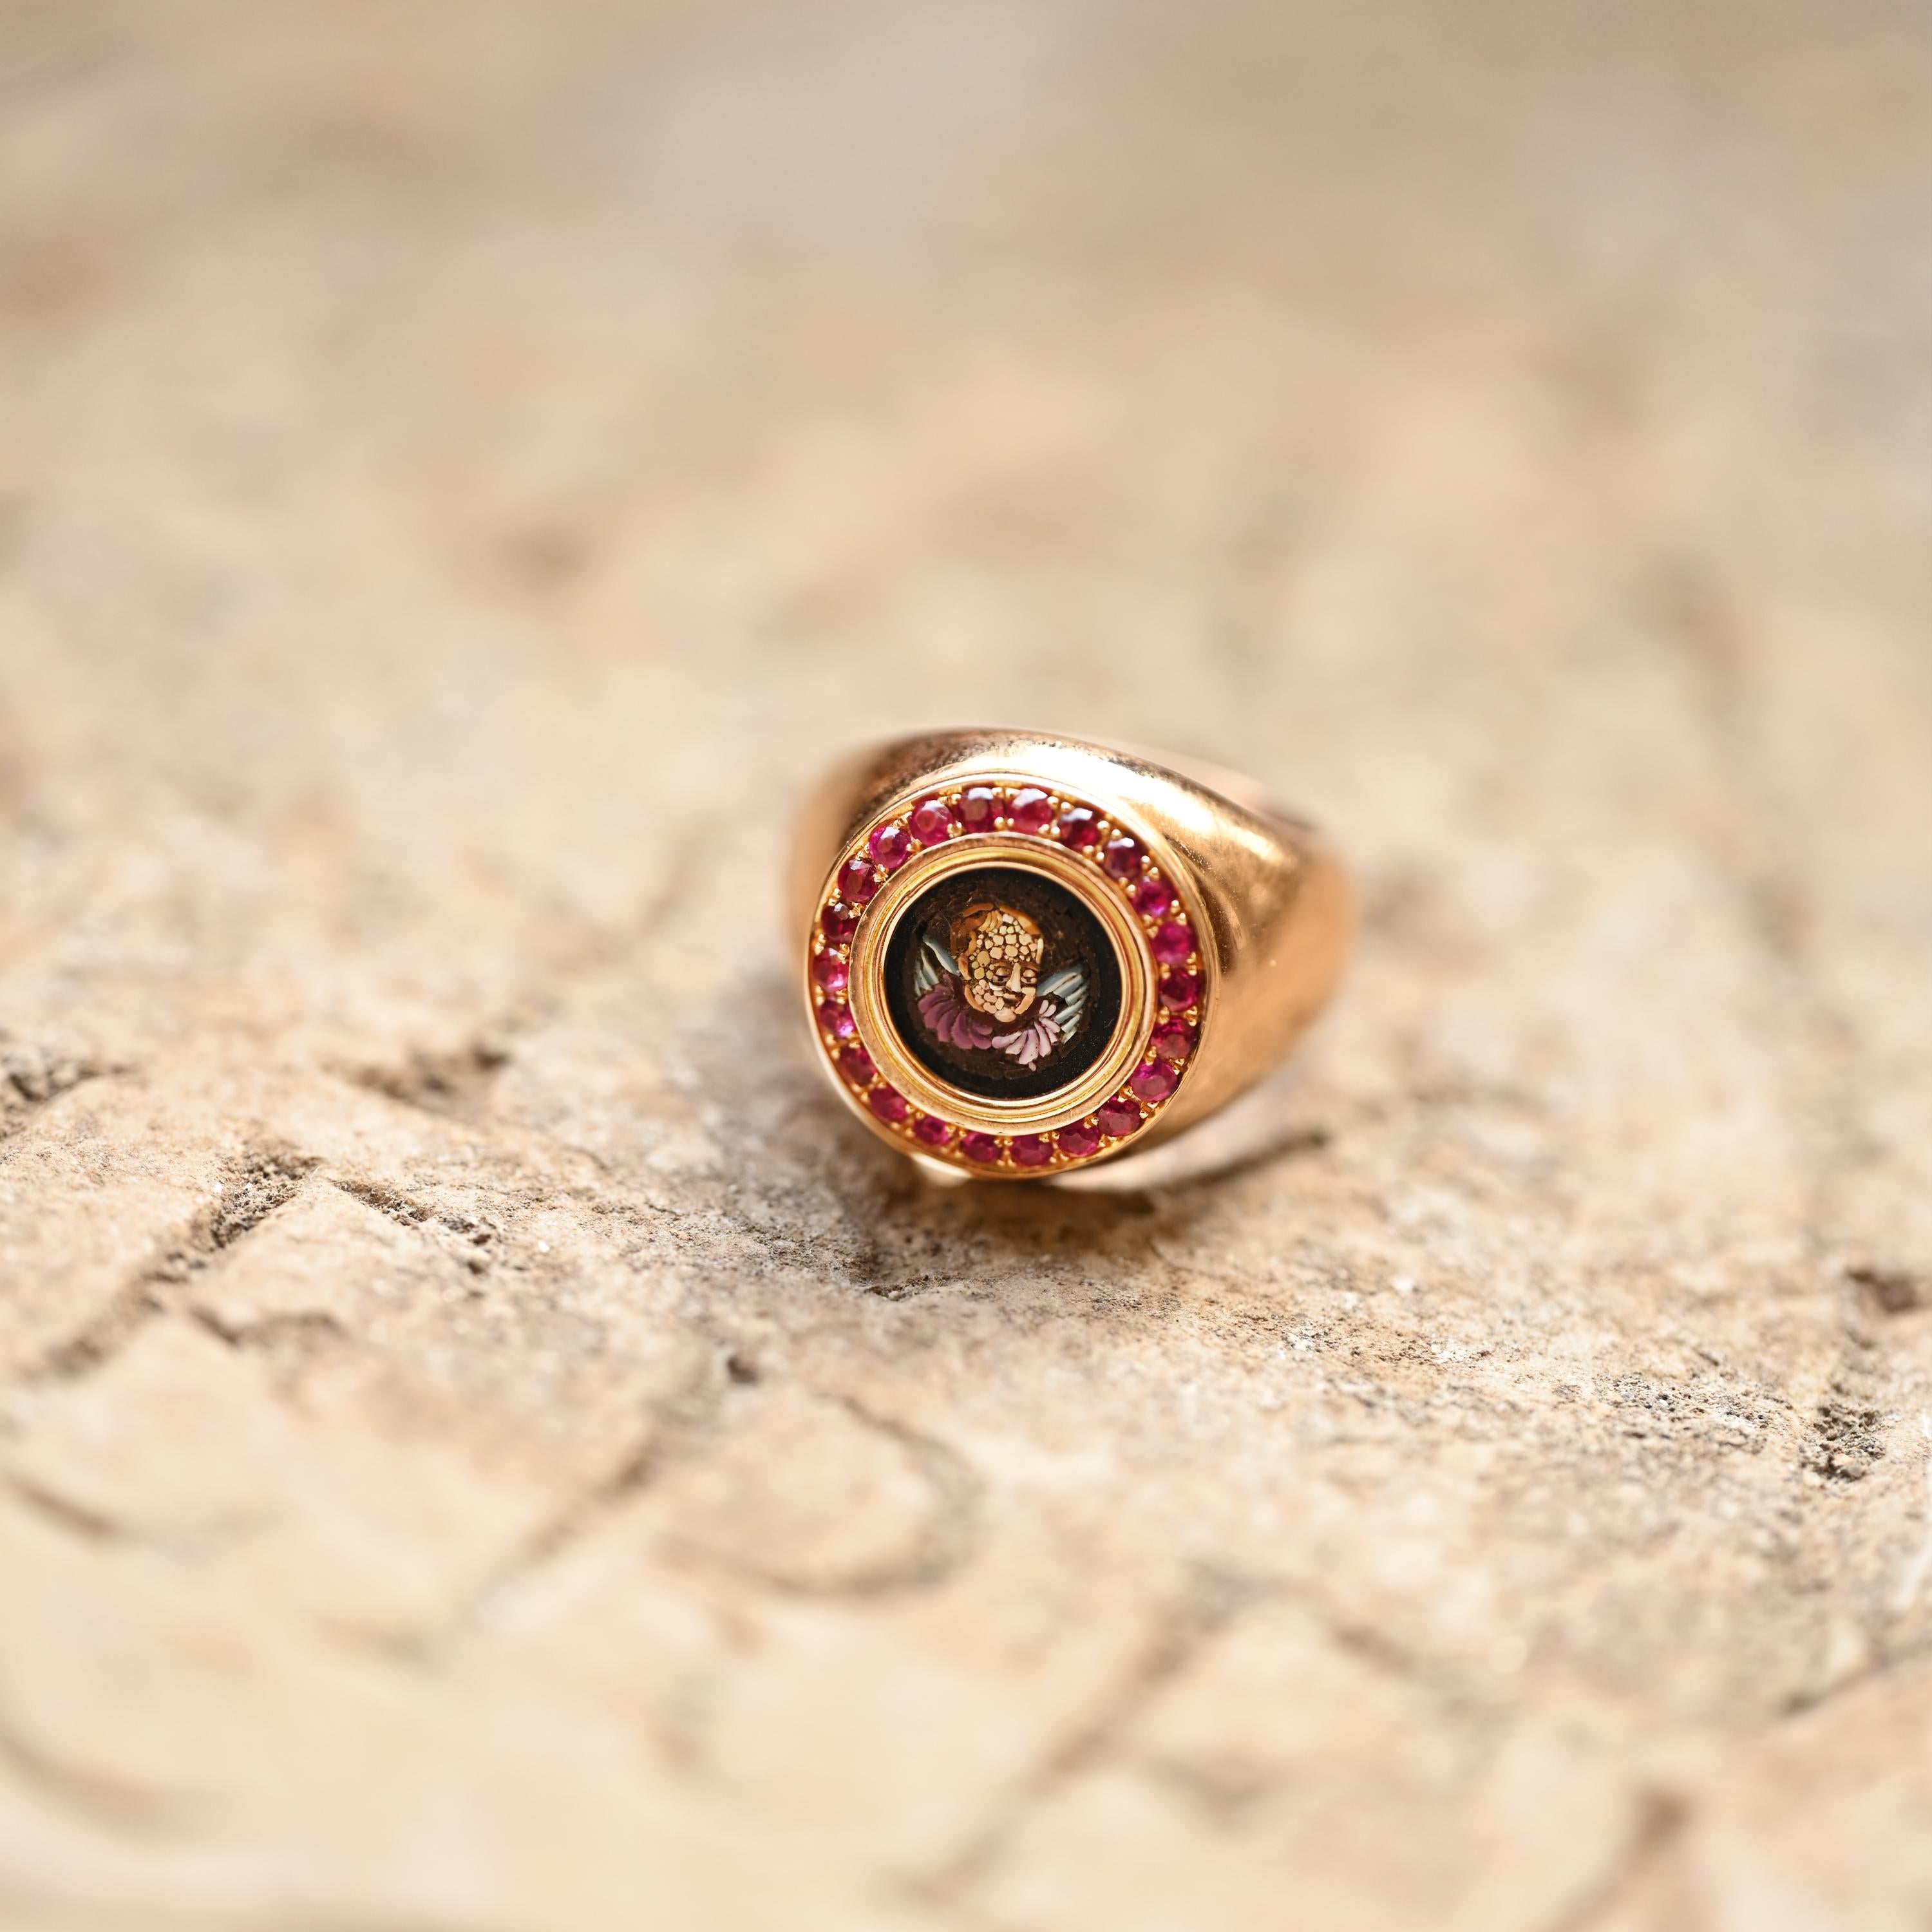 Genuine Micromosaic (Rome, around 1850) depicting a Winged Angel 18 kt Gold Ring For Sale 5